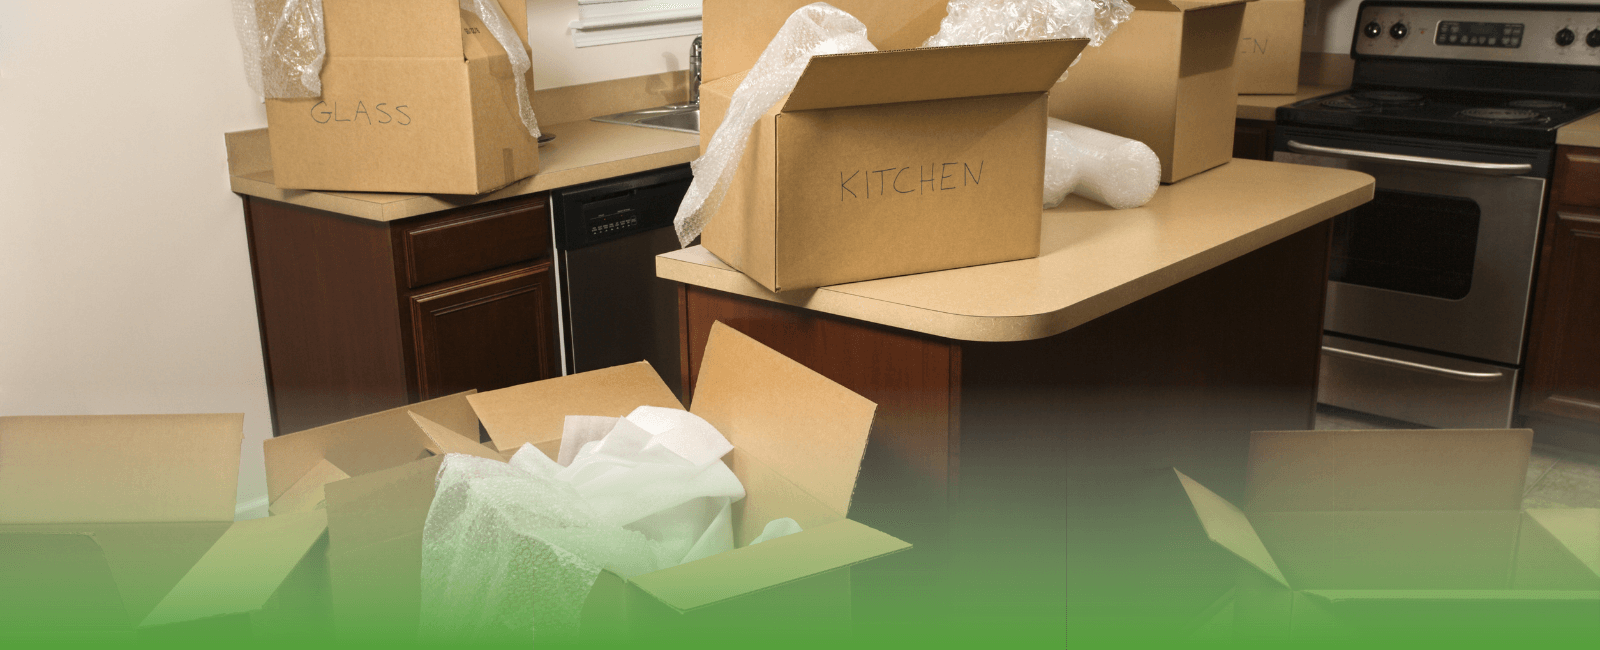 Effortless house shifting services in Karachi with expert unpacked cargo boxes handling.